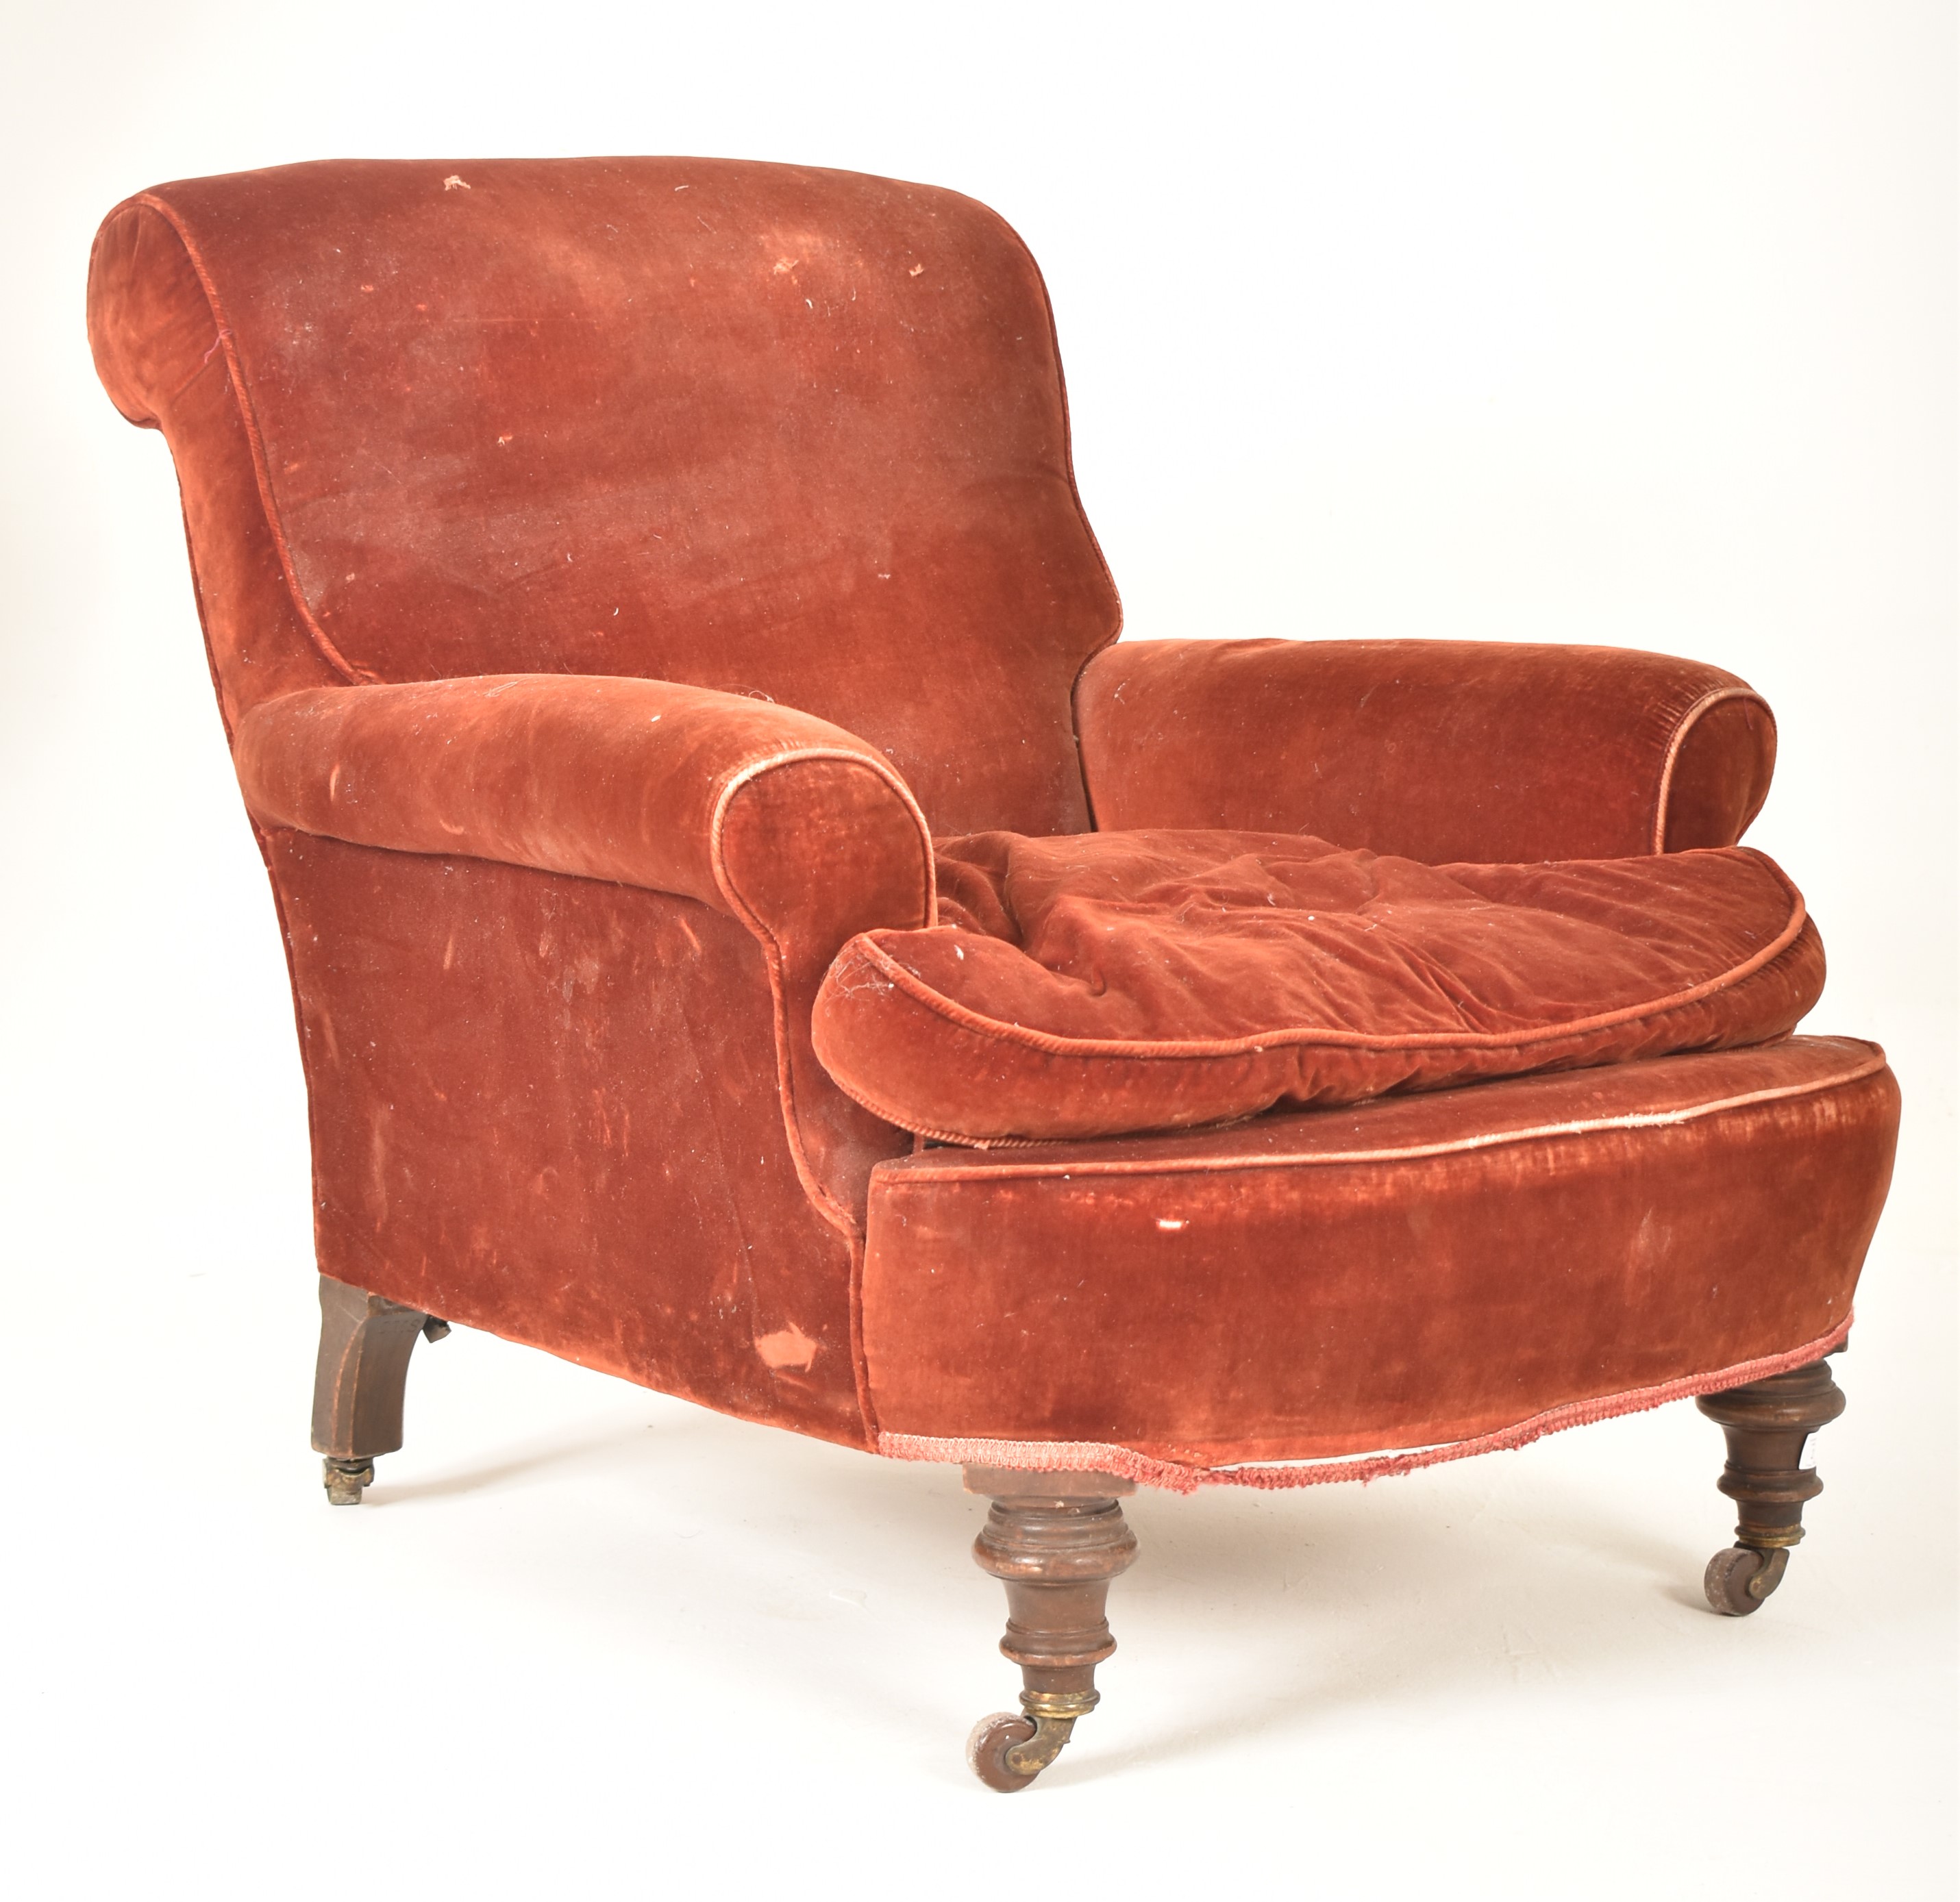 VICTORIAN UPHOLSTERED ARMCHAIR MANNER OF HOWARD & SONS